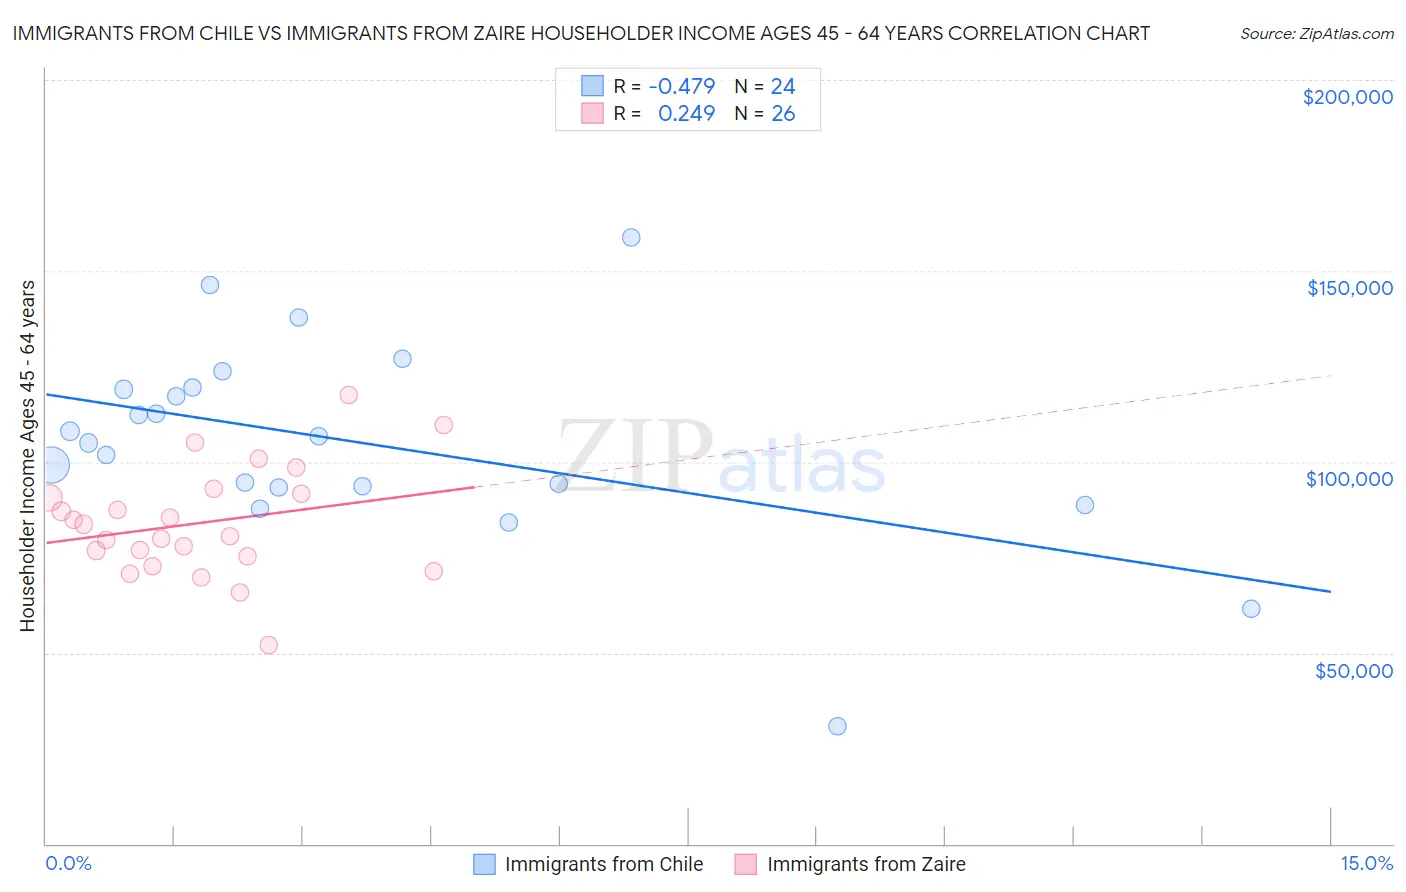 Immigrants from Chile vs Immigrants from Zaire Householder Income Ages 45 - 64 years